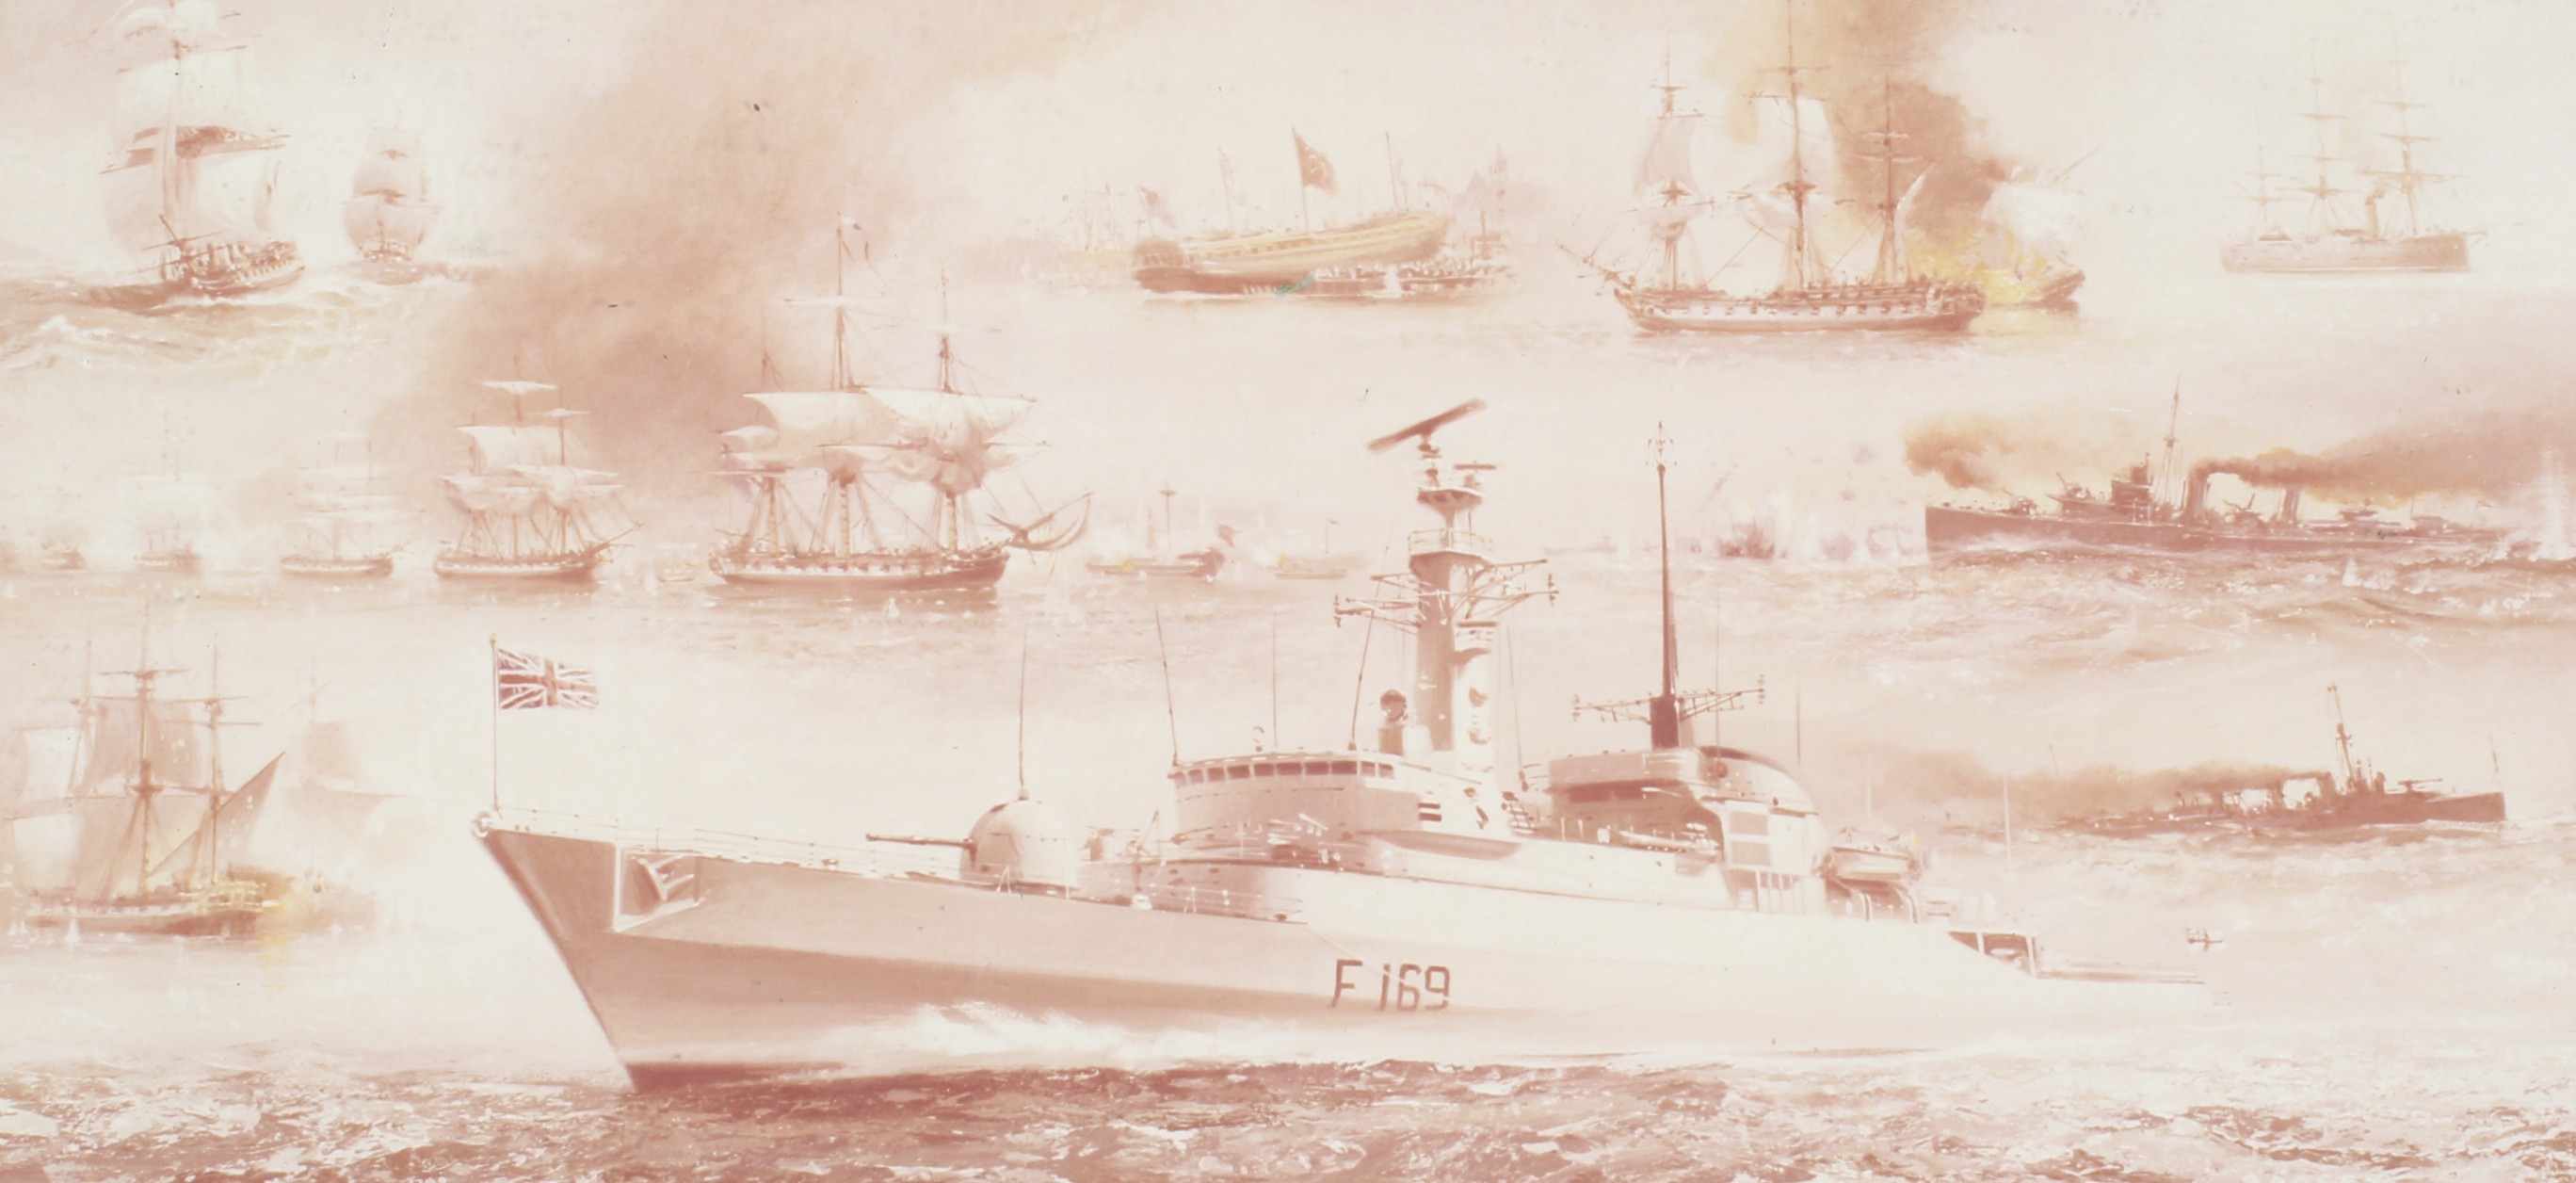 A vintage print of 'HMS Amazon'. Depicting multiple historical ships, - Image 2 of 2